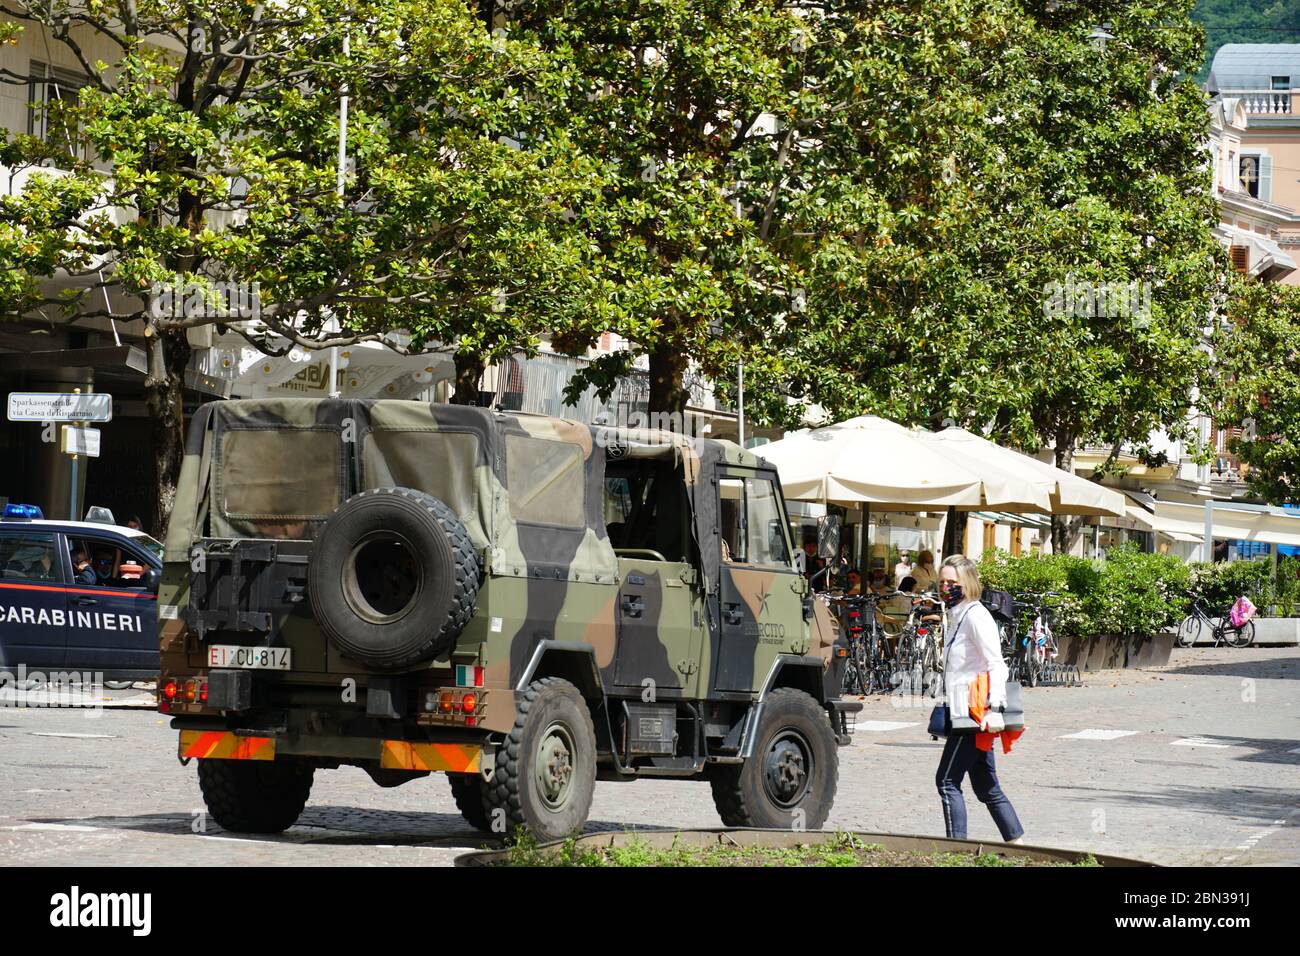 Army vehicle and walking soldiers on the street in Merano, South Tyrol, Italy, checking the city, patrolling after Italy has entered into Phase 2 Stock Photo